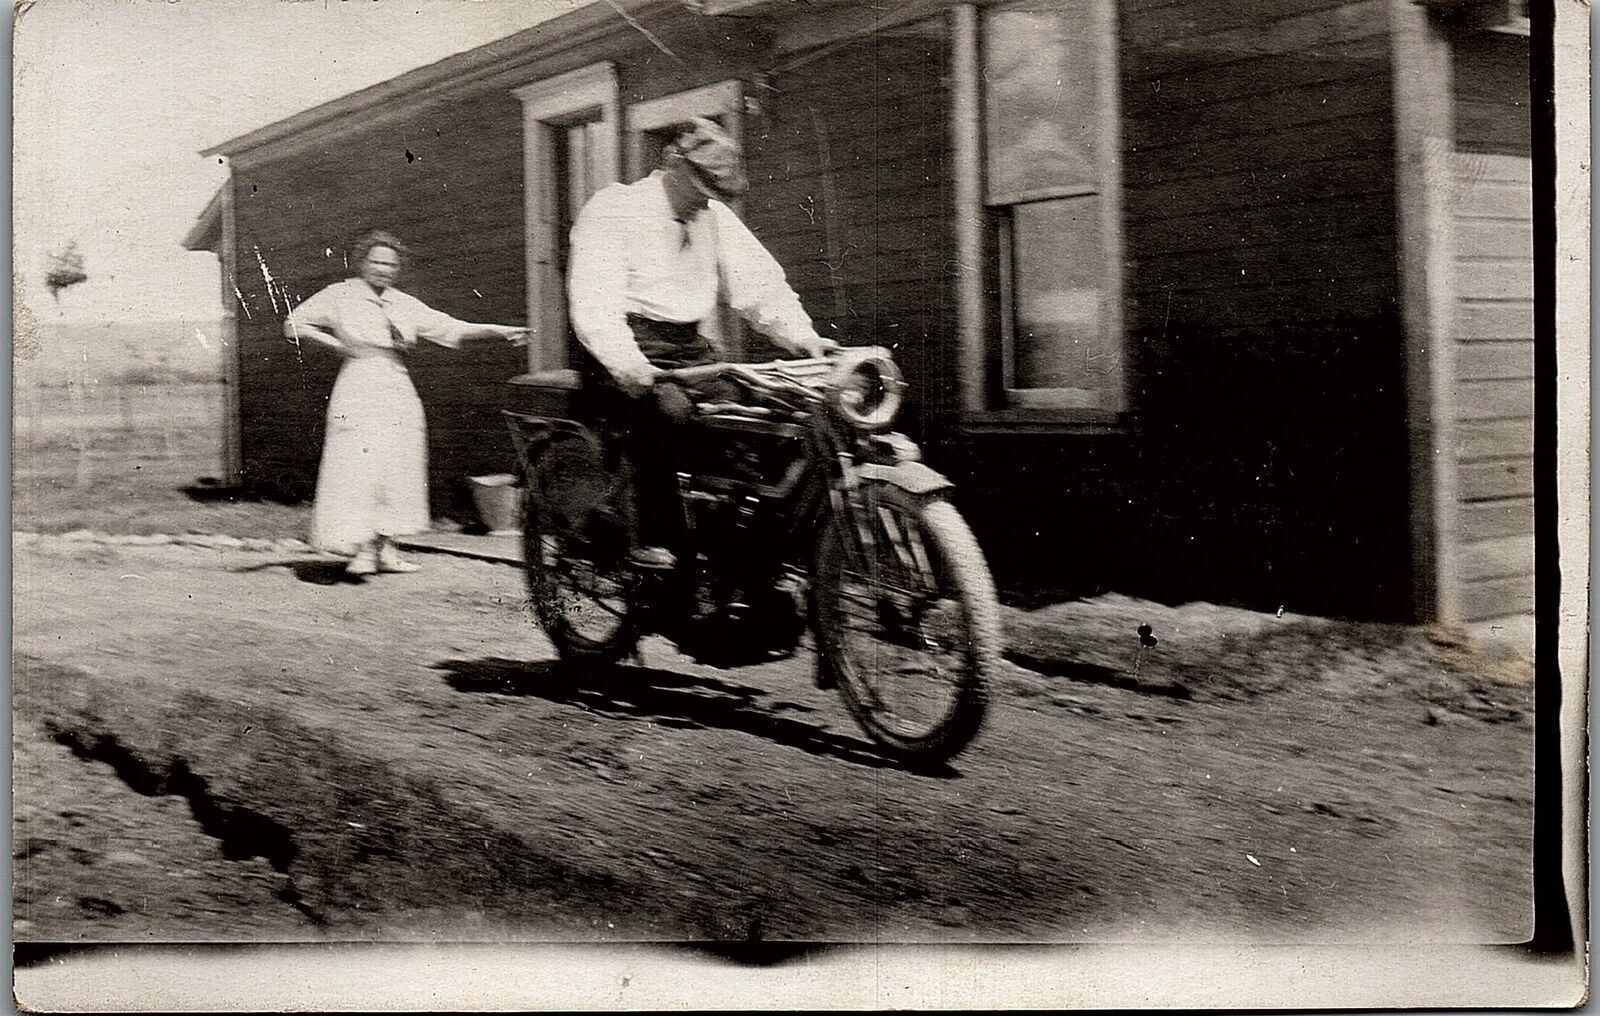 c1917 EXCELSIOR TWIN MOTORCYCLE RIDER WITH CAP PHOTO RARE RPPC POSTCARD 39-136